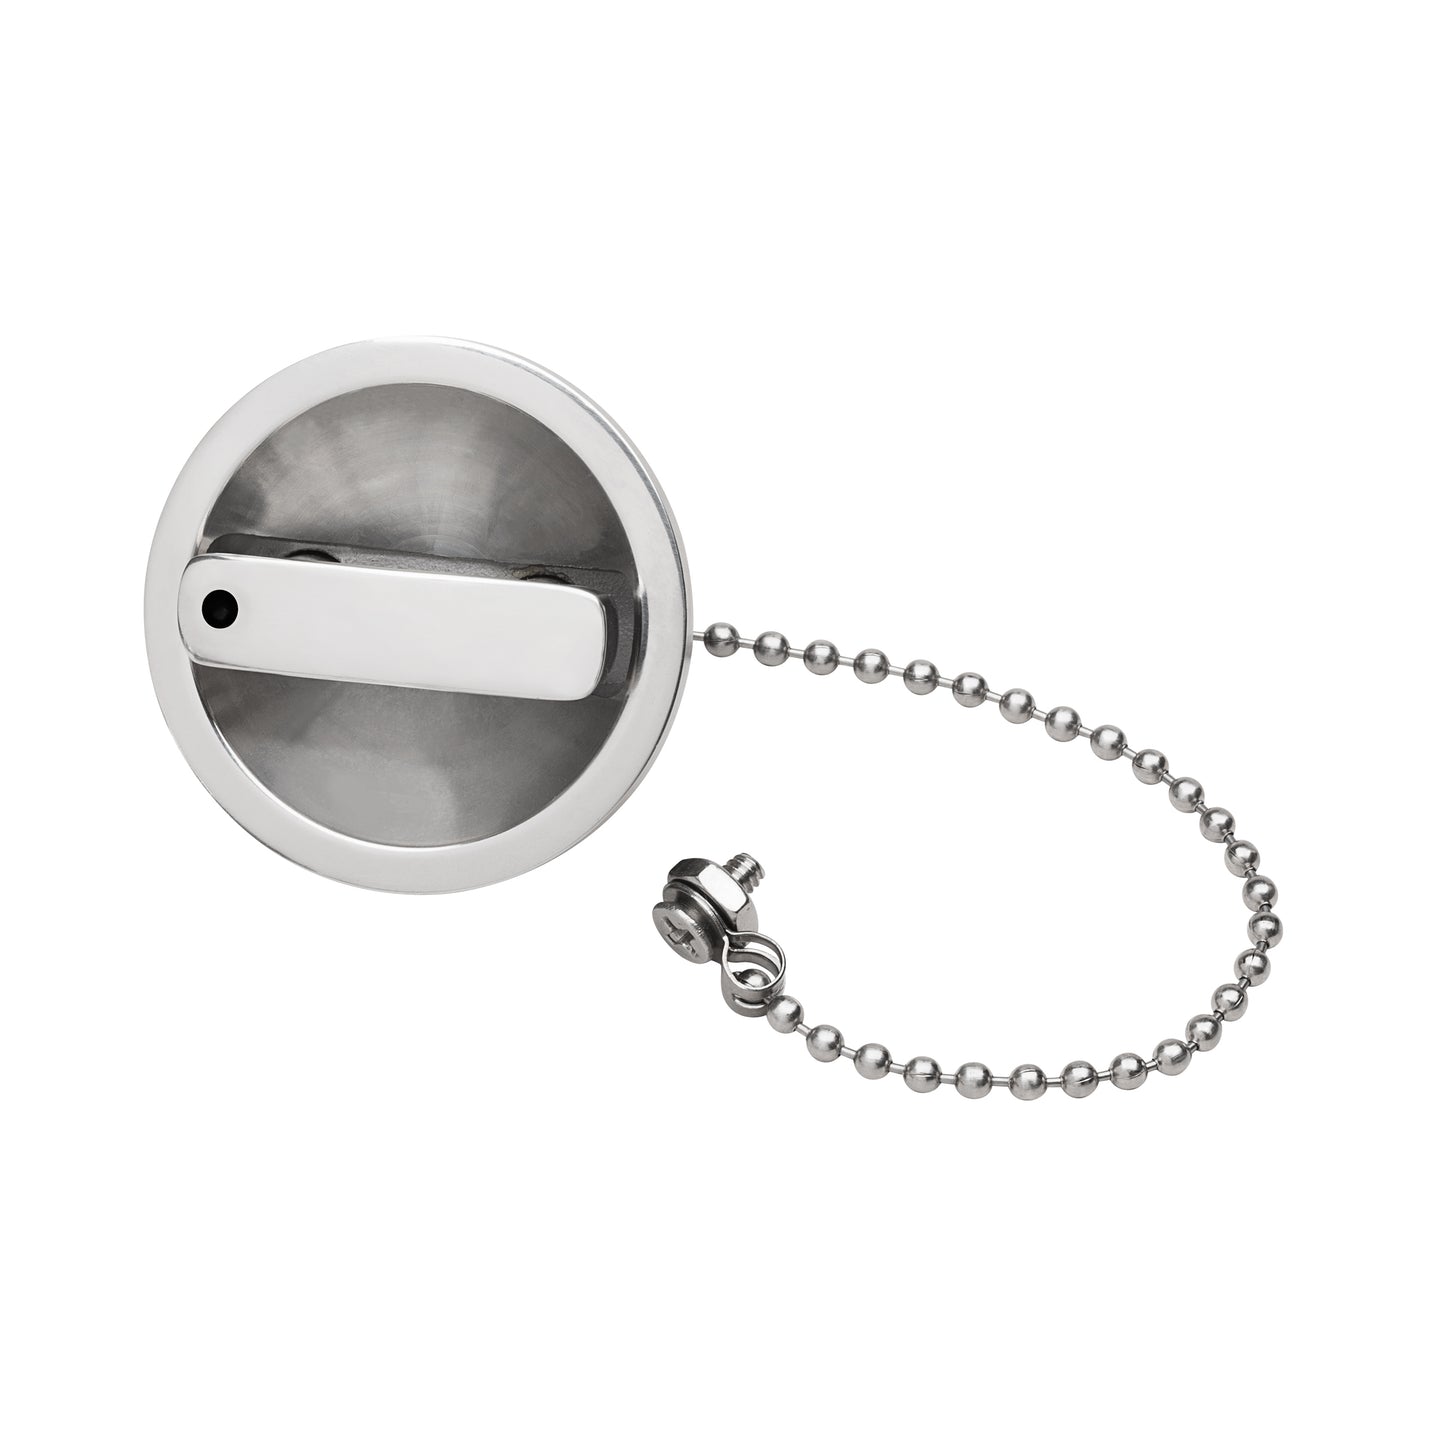 Replacement 1/4-Turn Pull-Up Cap with Chain